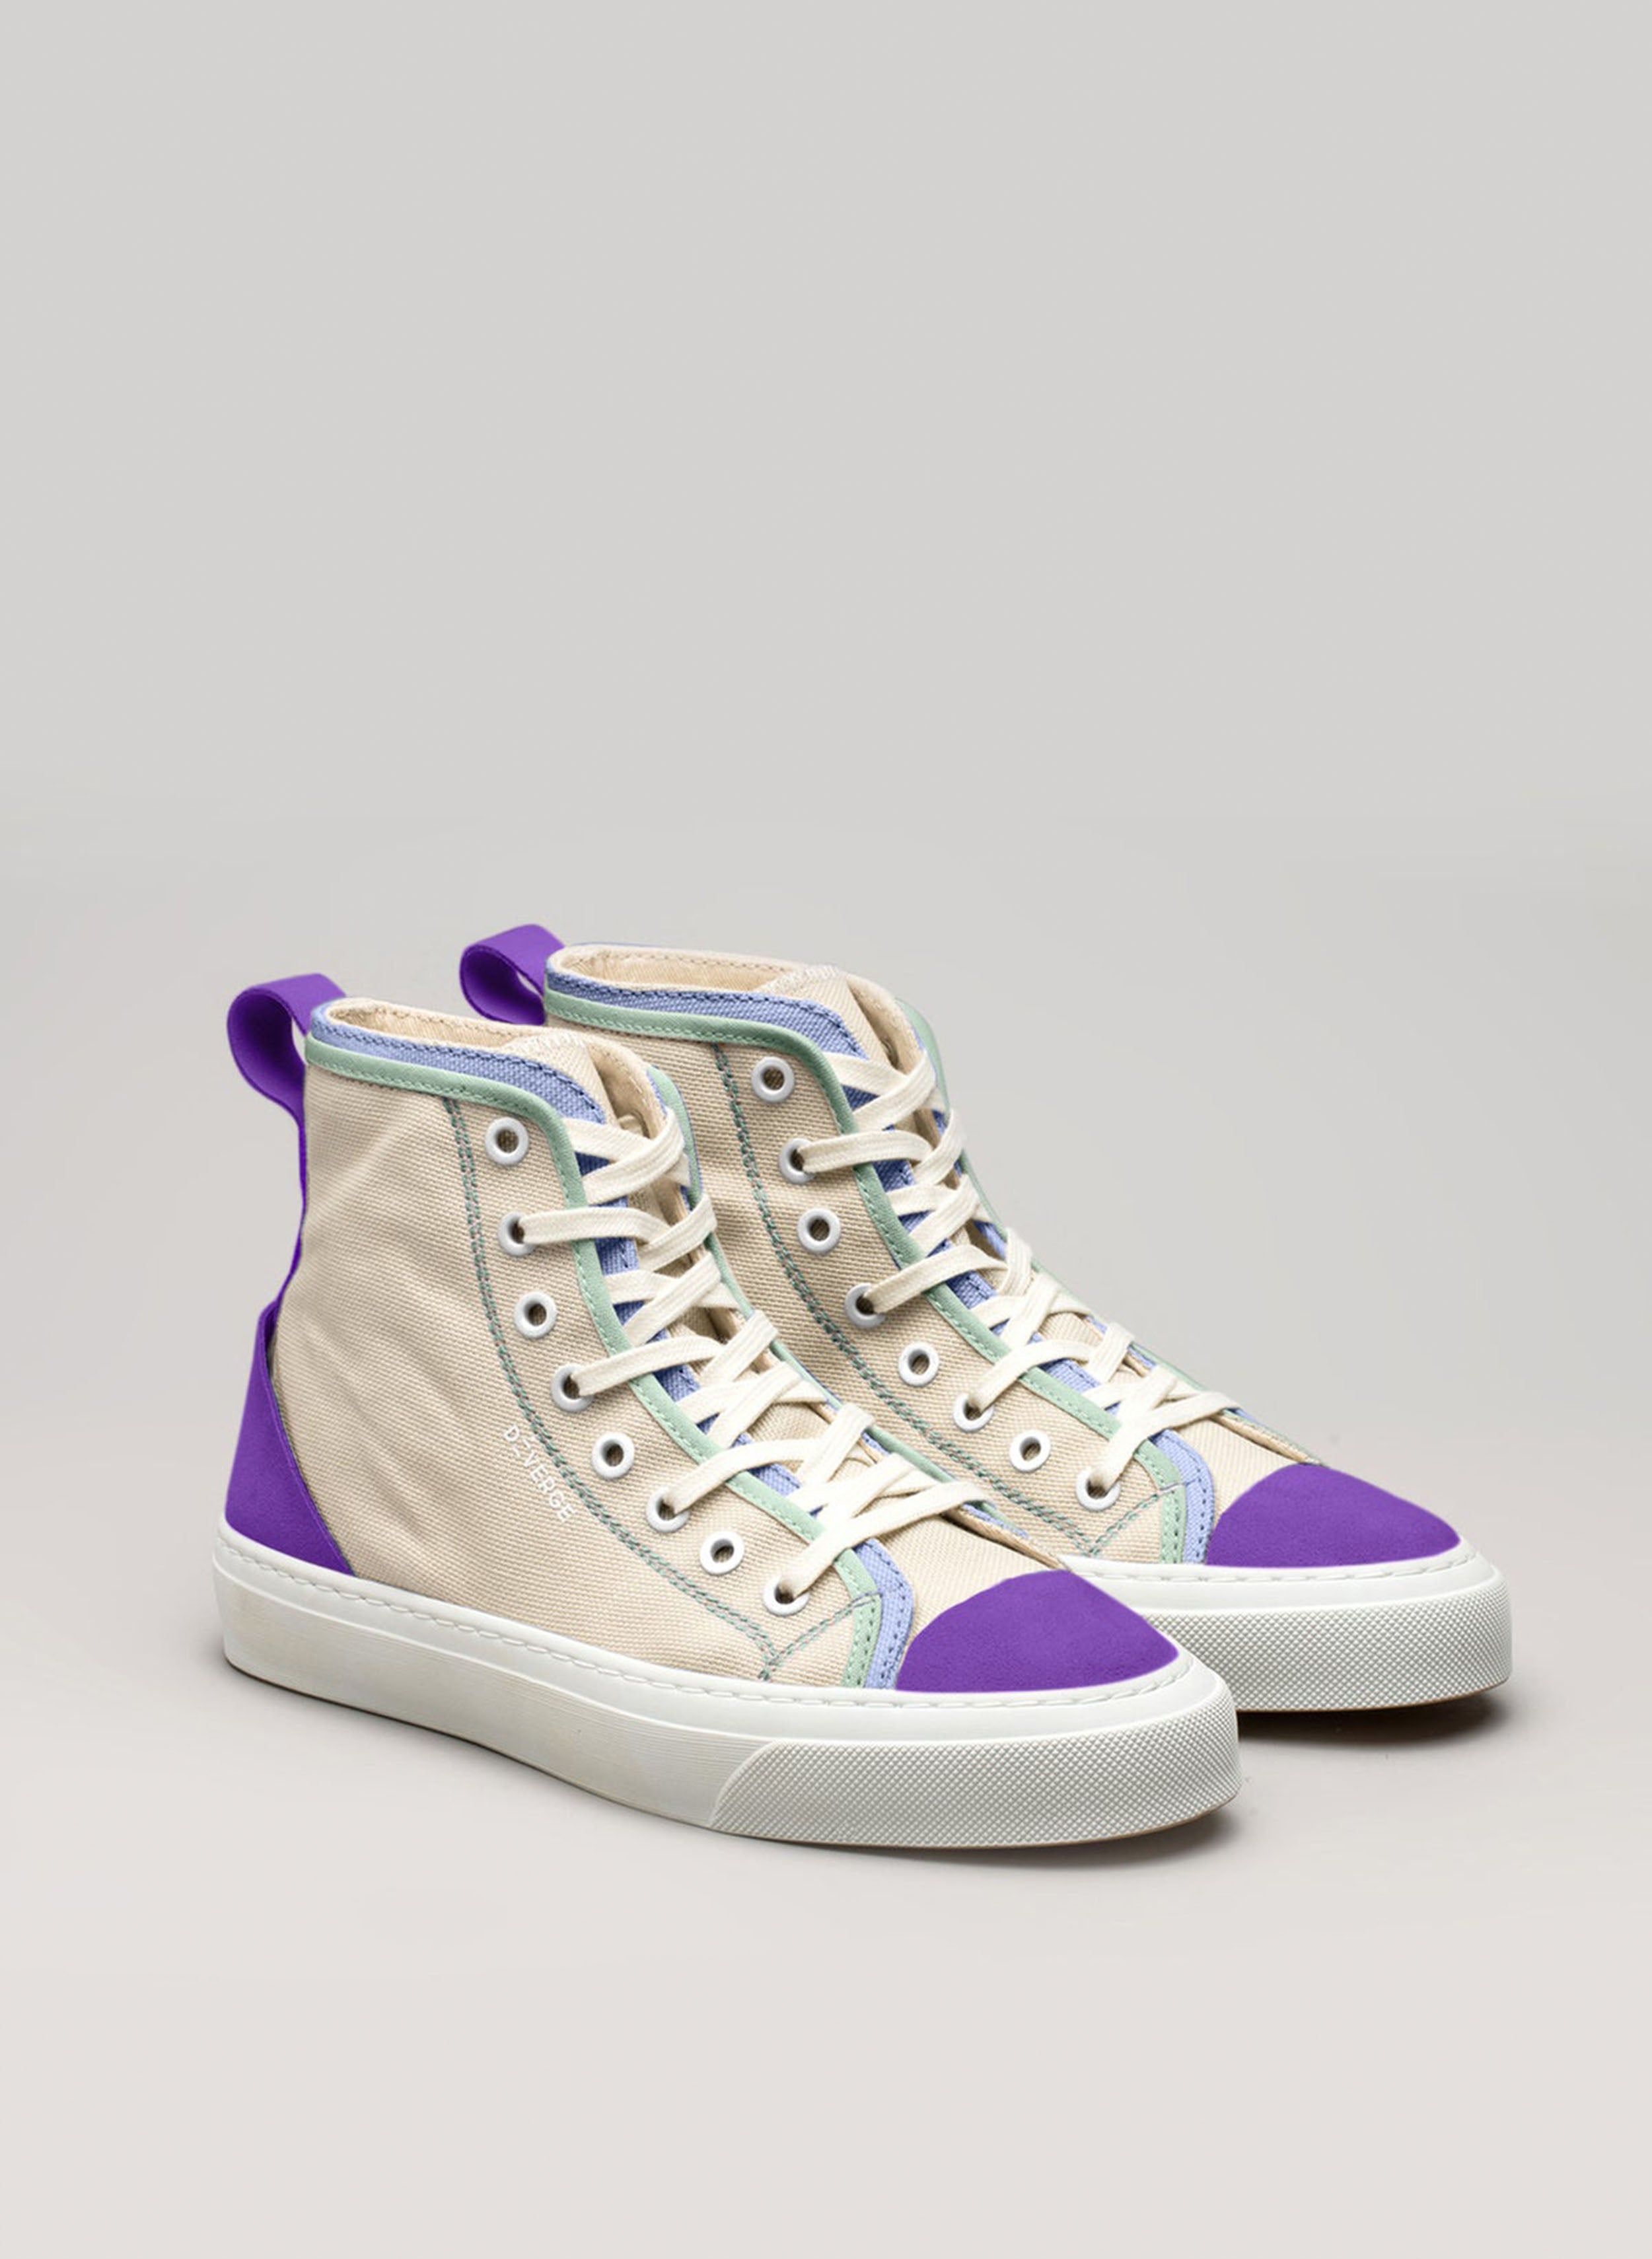 A pair of custom high top sneakers from Diverge promoting social impact throught the imagine project.